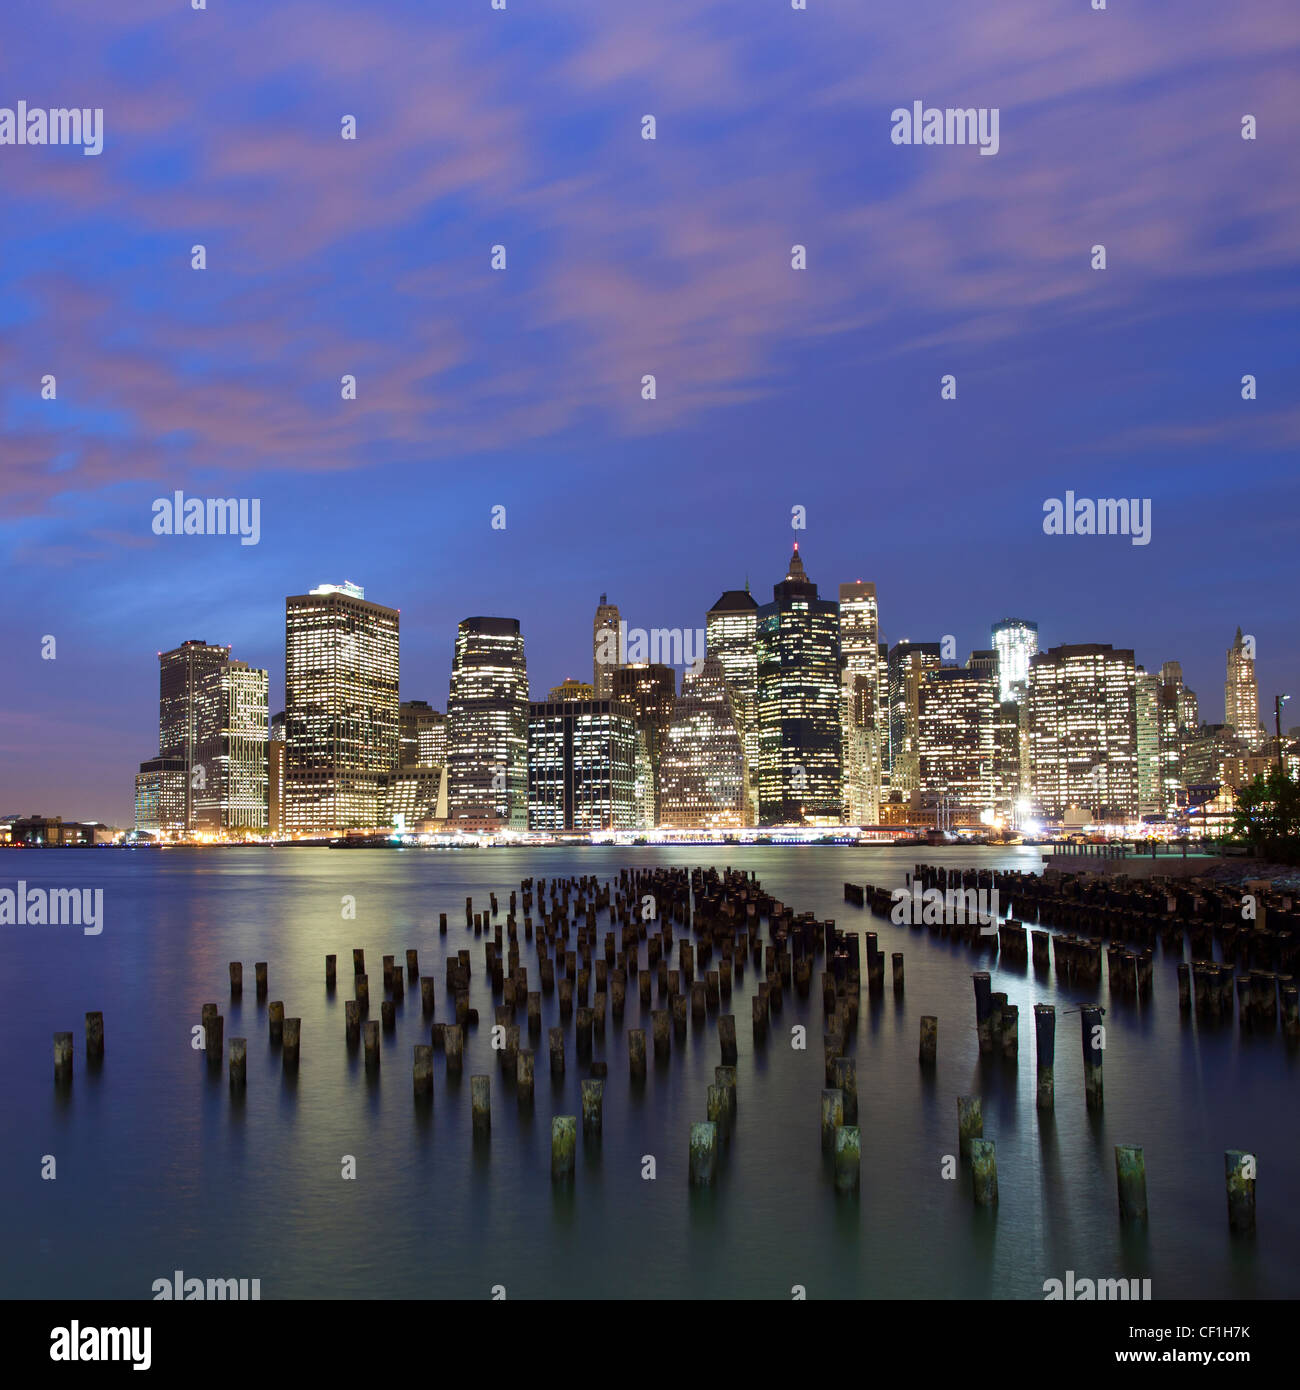 United States of America, New York, Dusk view of the skyscrapers of Manhattan from the Brooklyn Heights neighborhood. Stock Photo